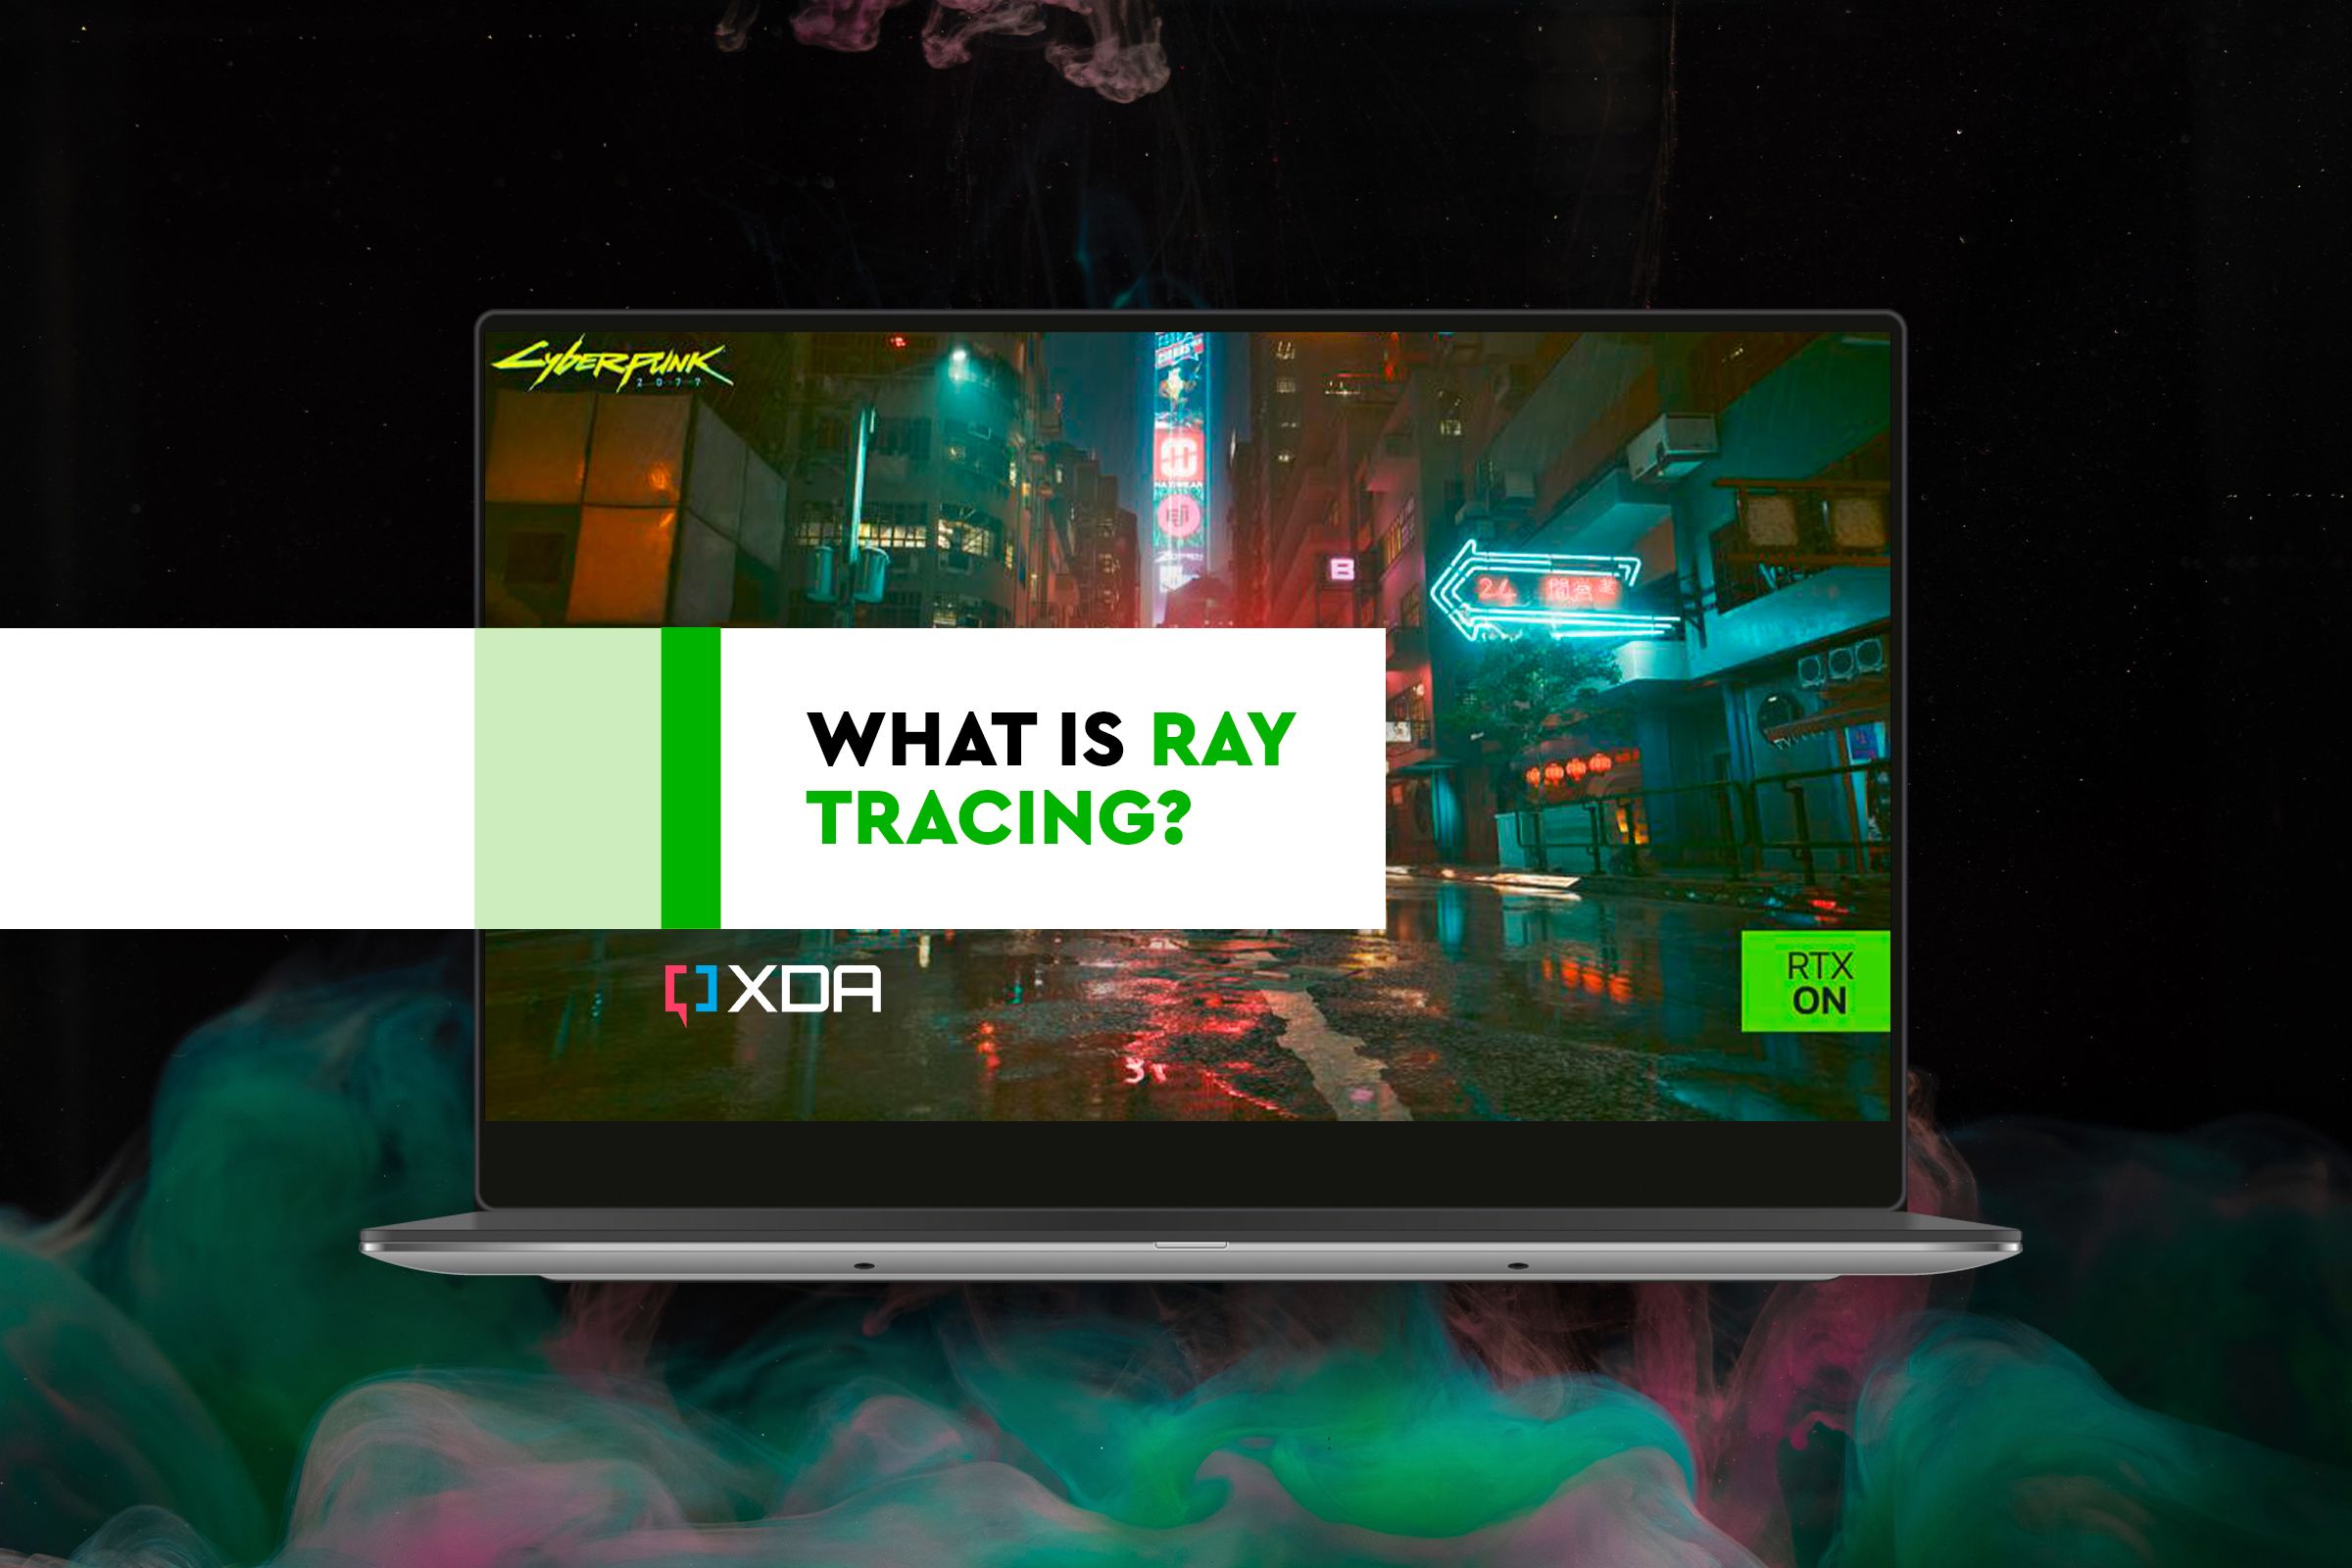 What is ray tracing